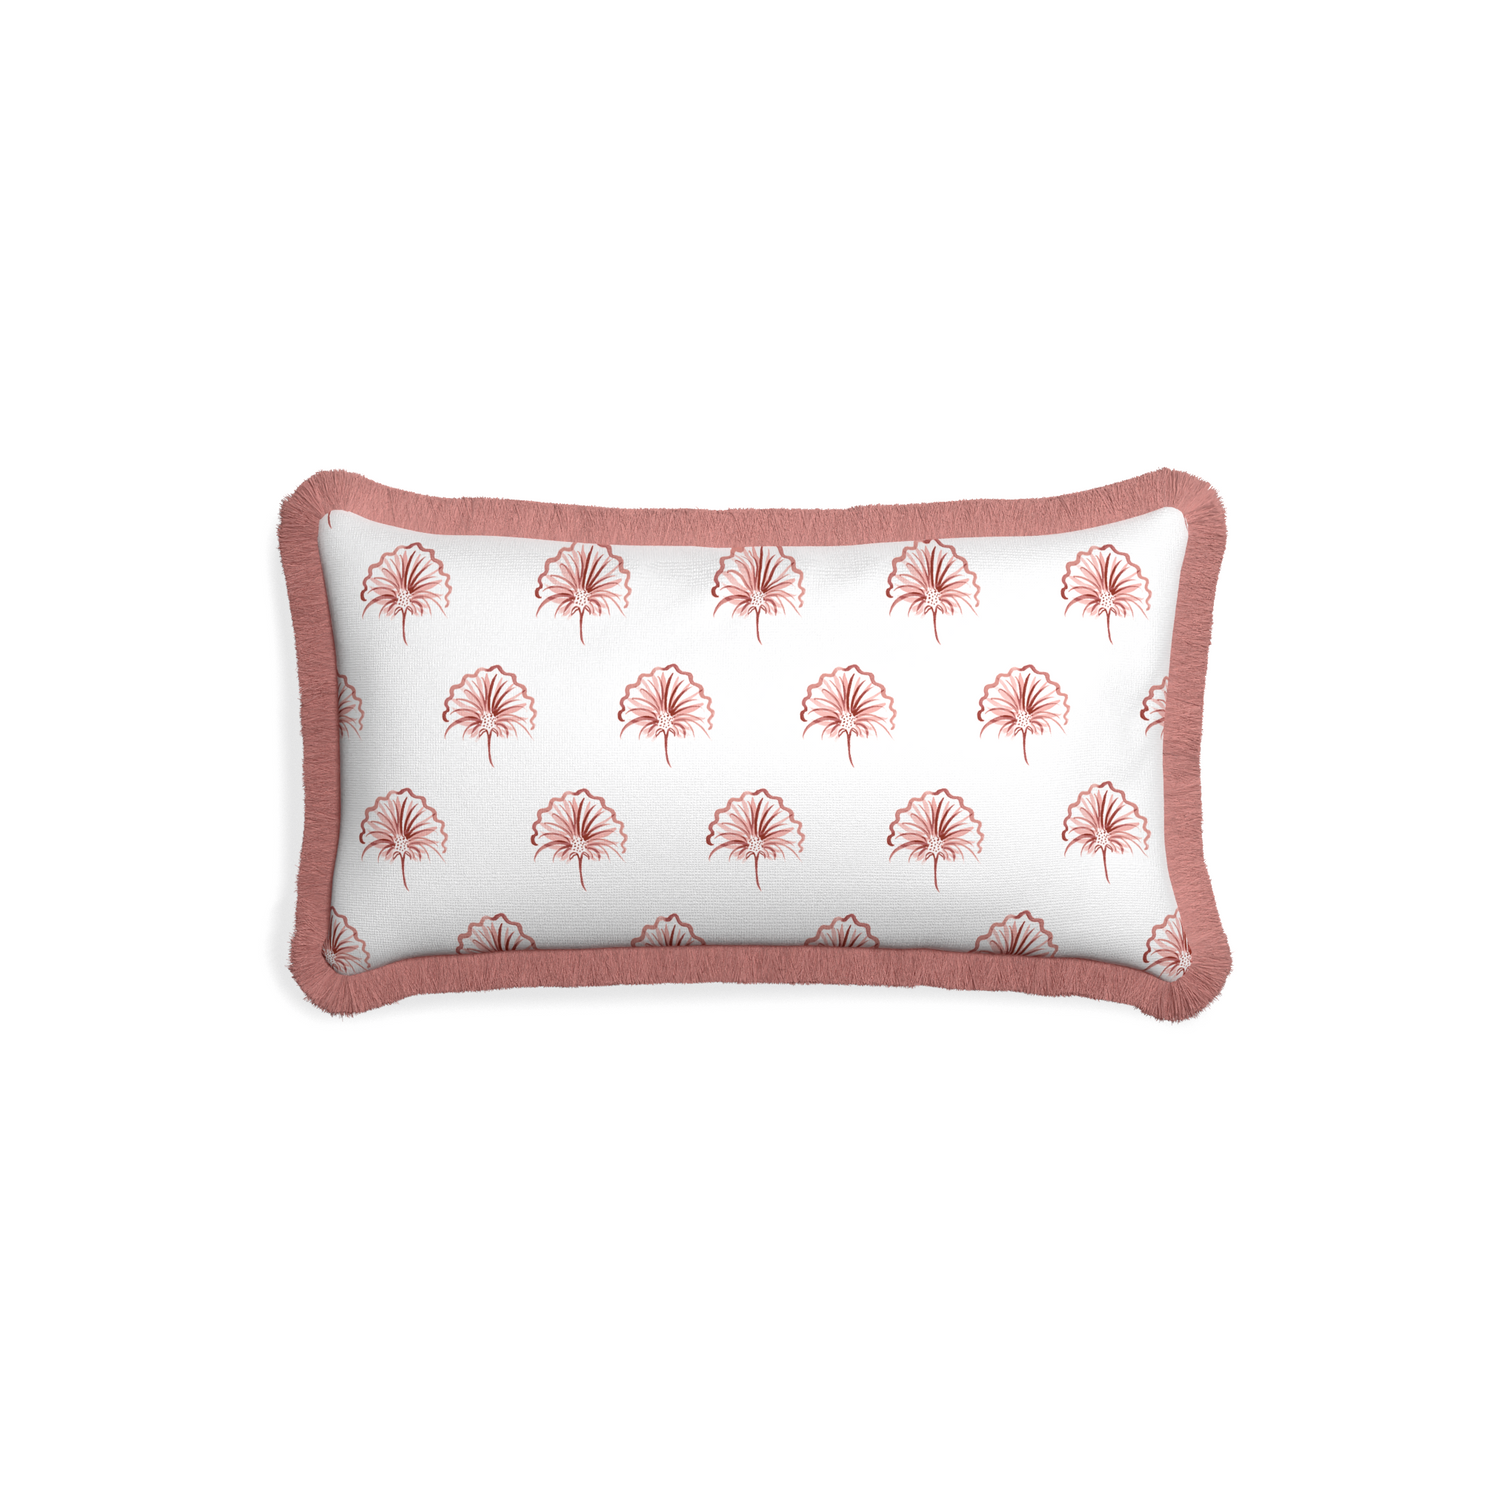 Petite-lumbar penelope rose custom floral pinkpillow with d fringe on white background